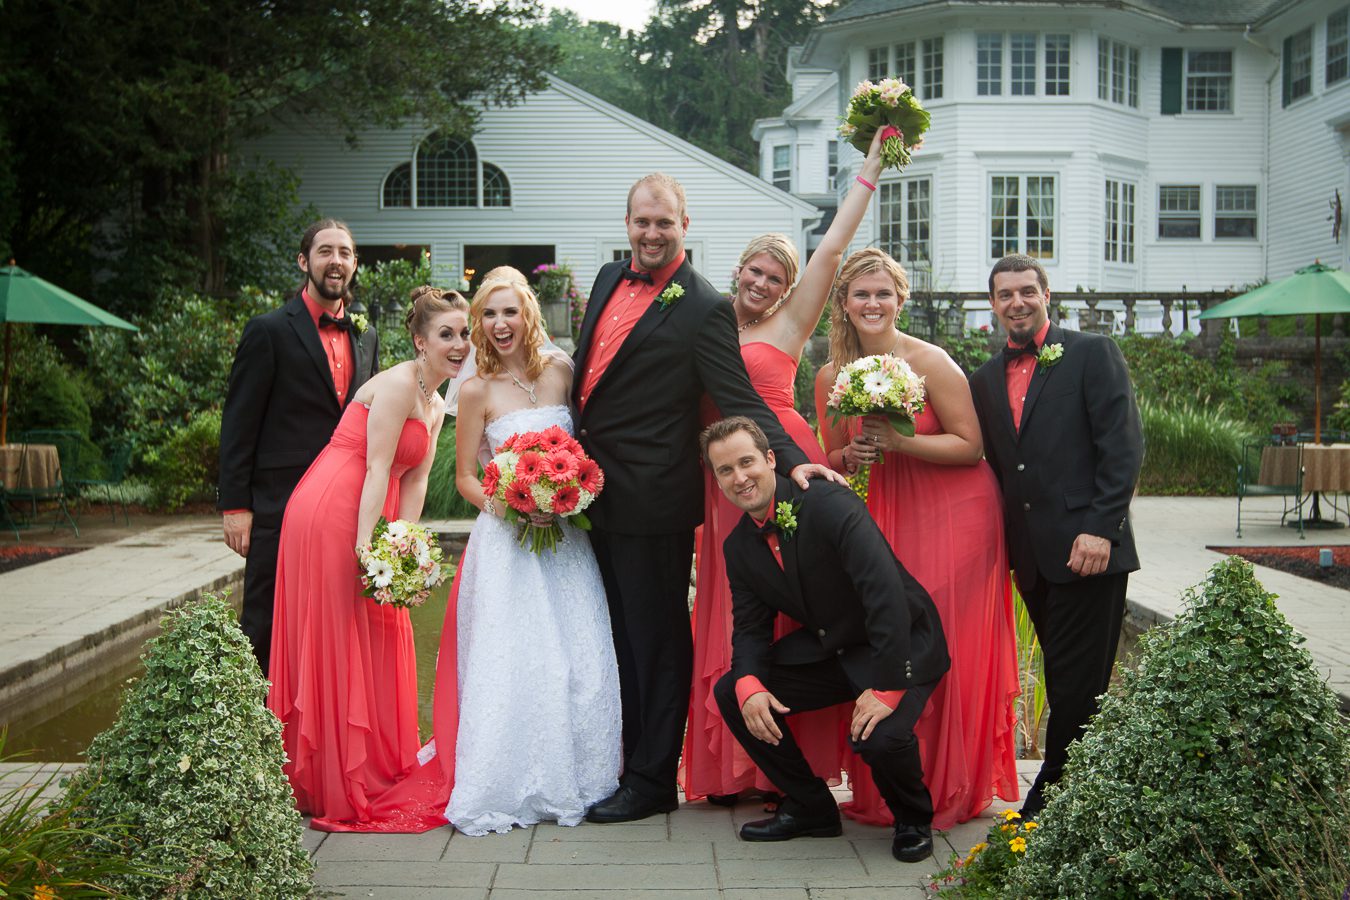 Bridal-party-in-courtyard-at-Harding-Allen-Estate-Barre-MA